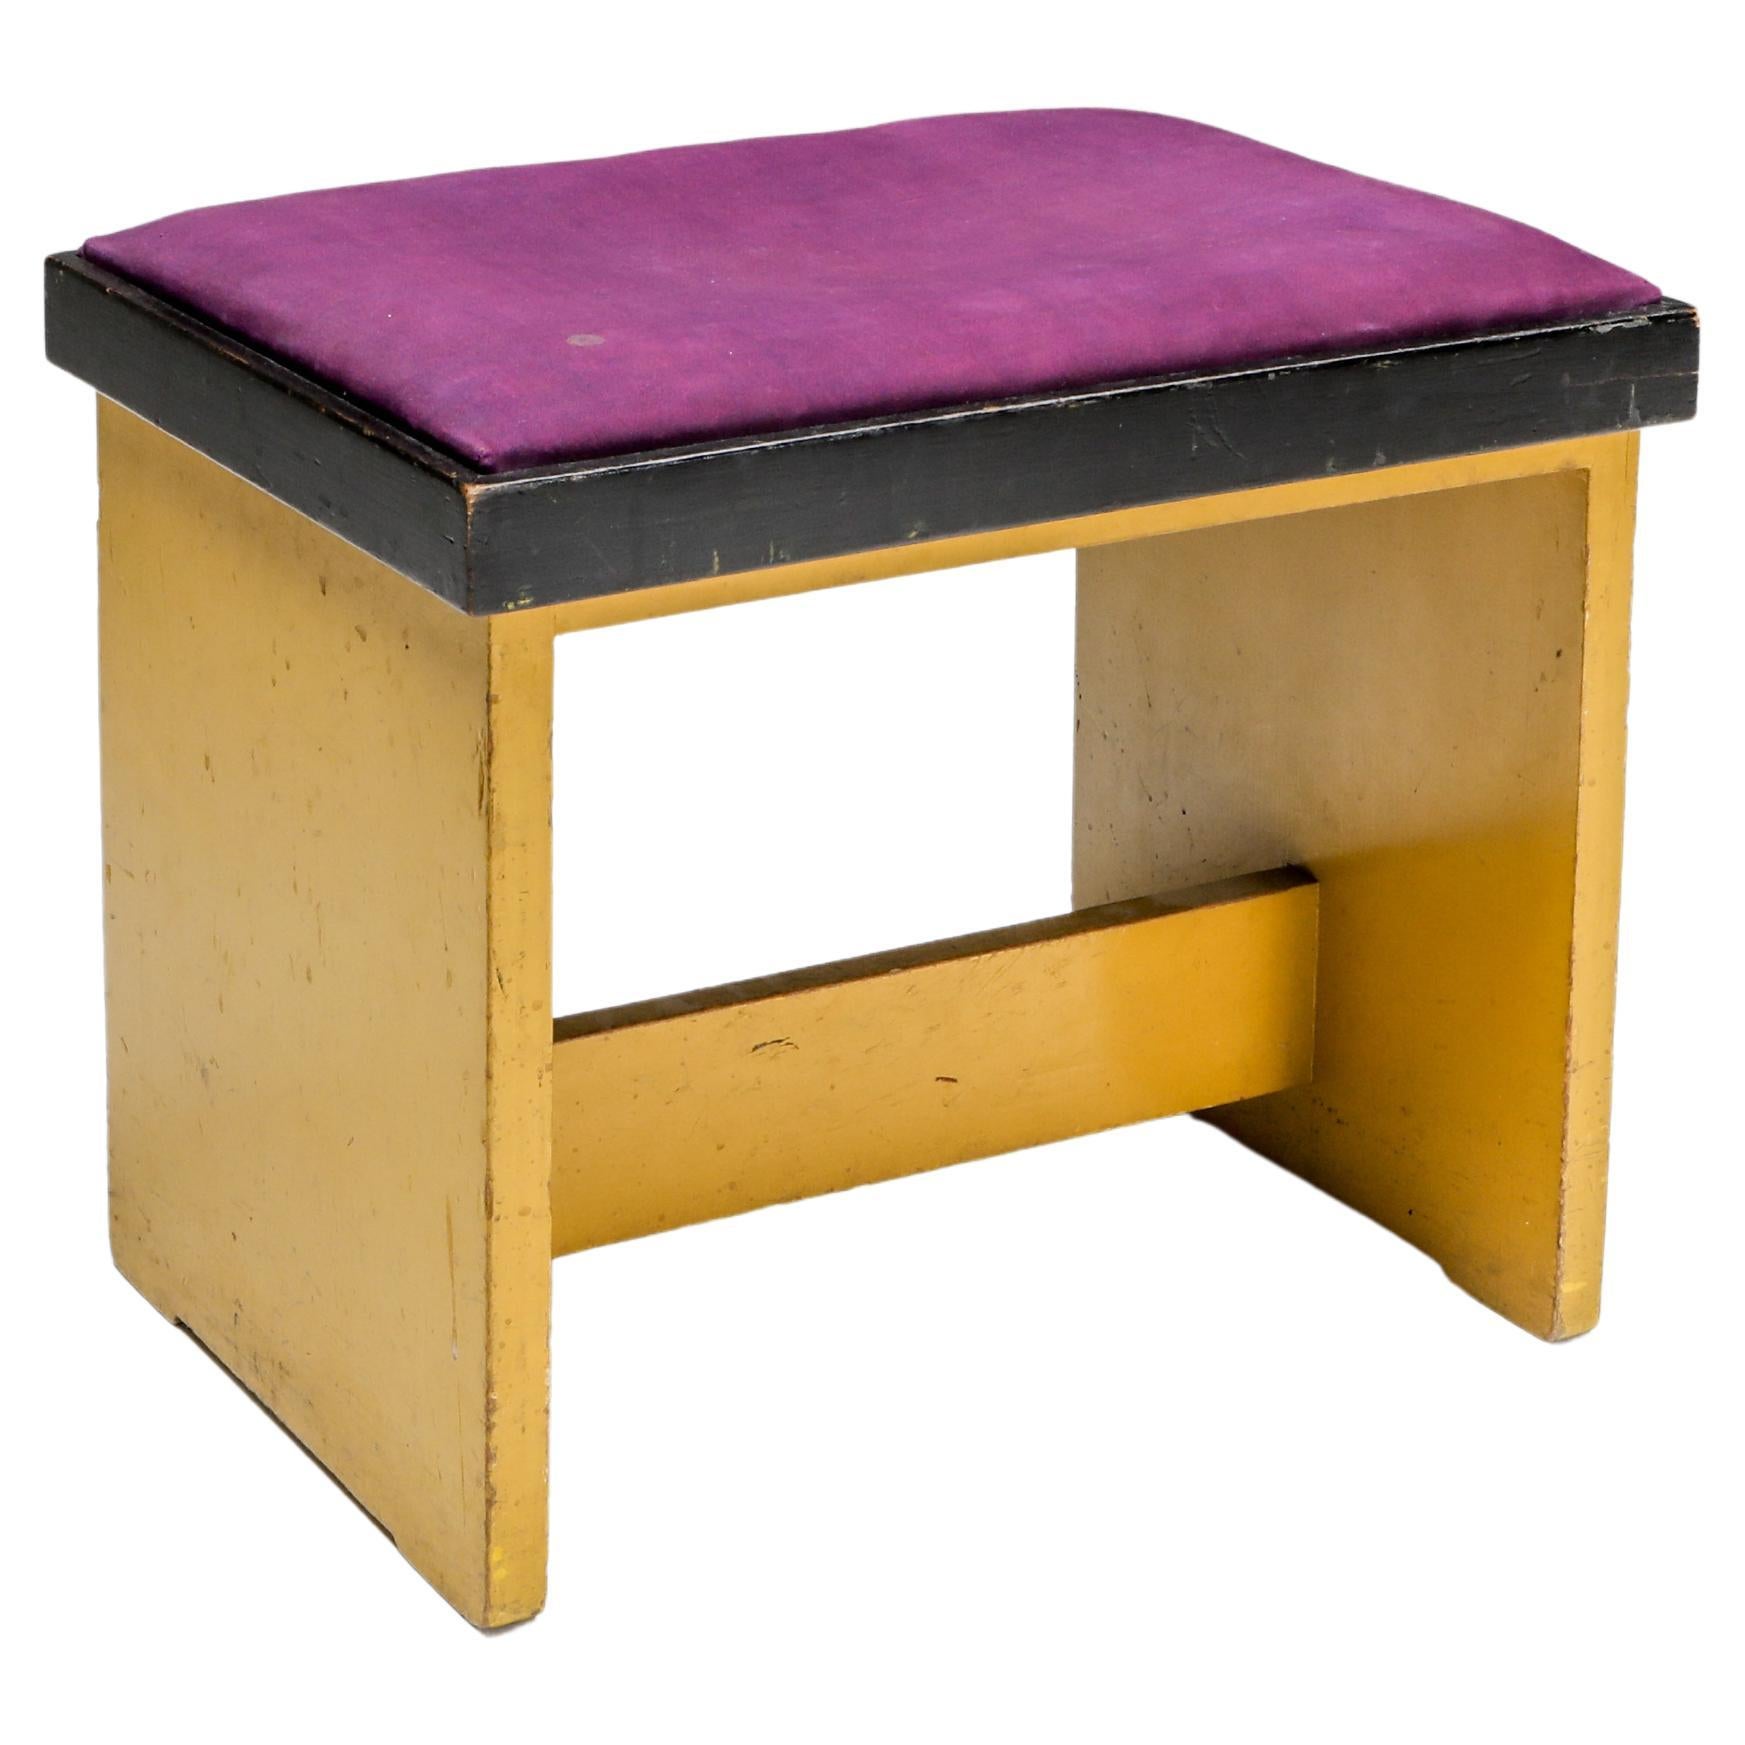 Modernist Stool by H. Wouda, 1924 For Sale